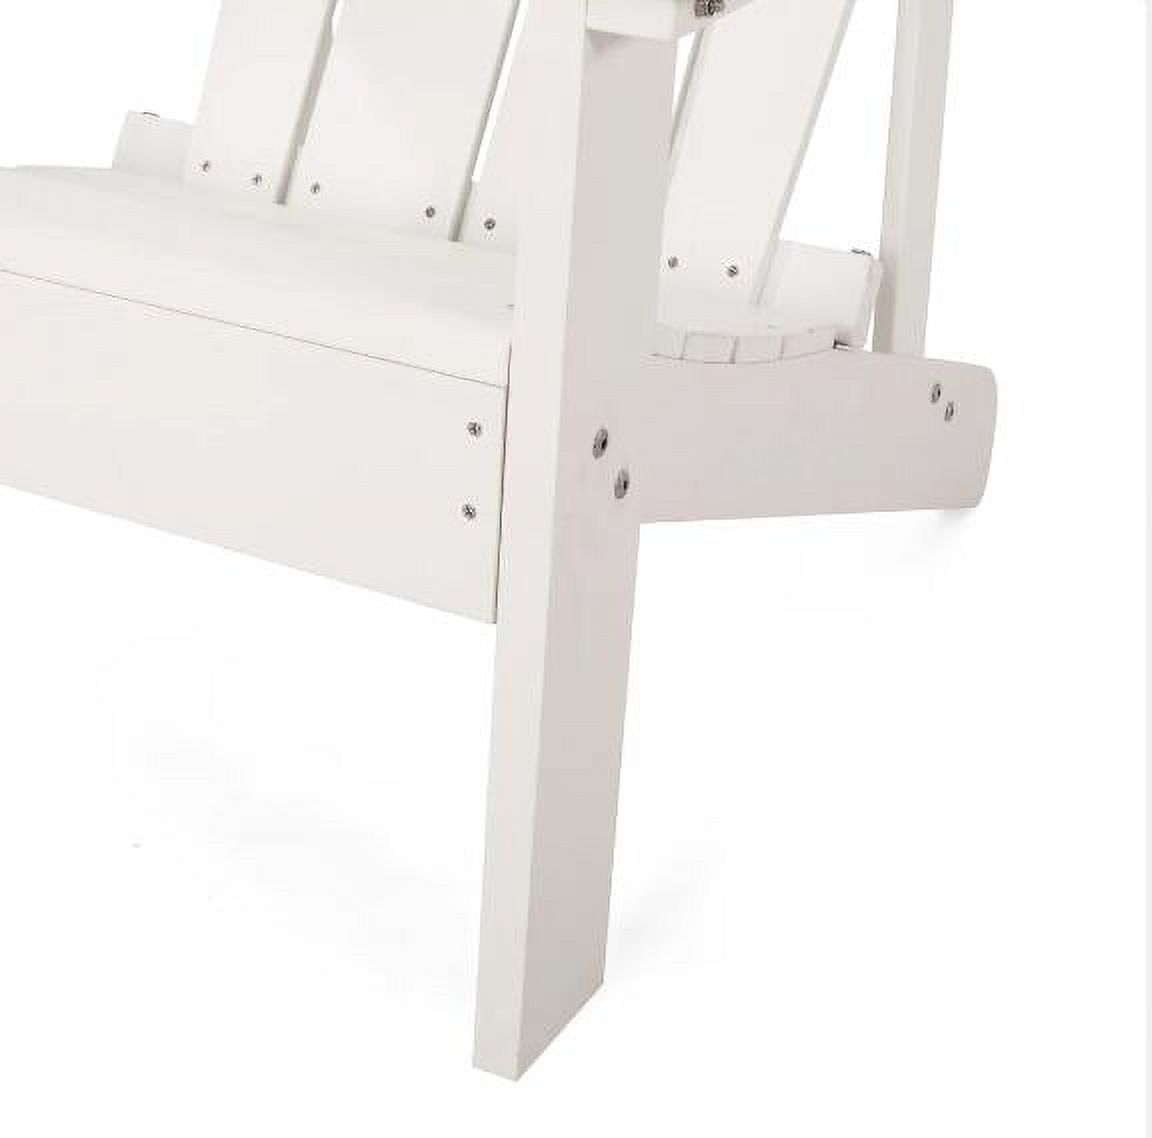 LANTRO JS Classic Pure White Outdoor Solid Wood Adirondack Chair Garden Lounge Chair - image 4 of 7